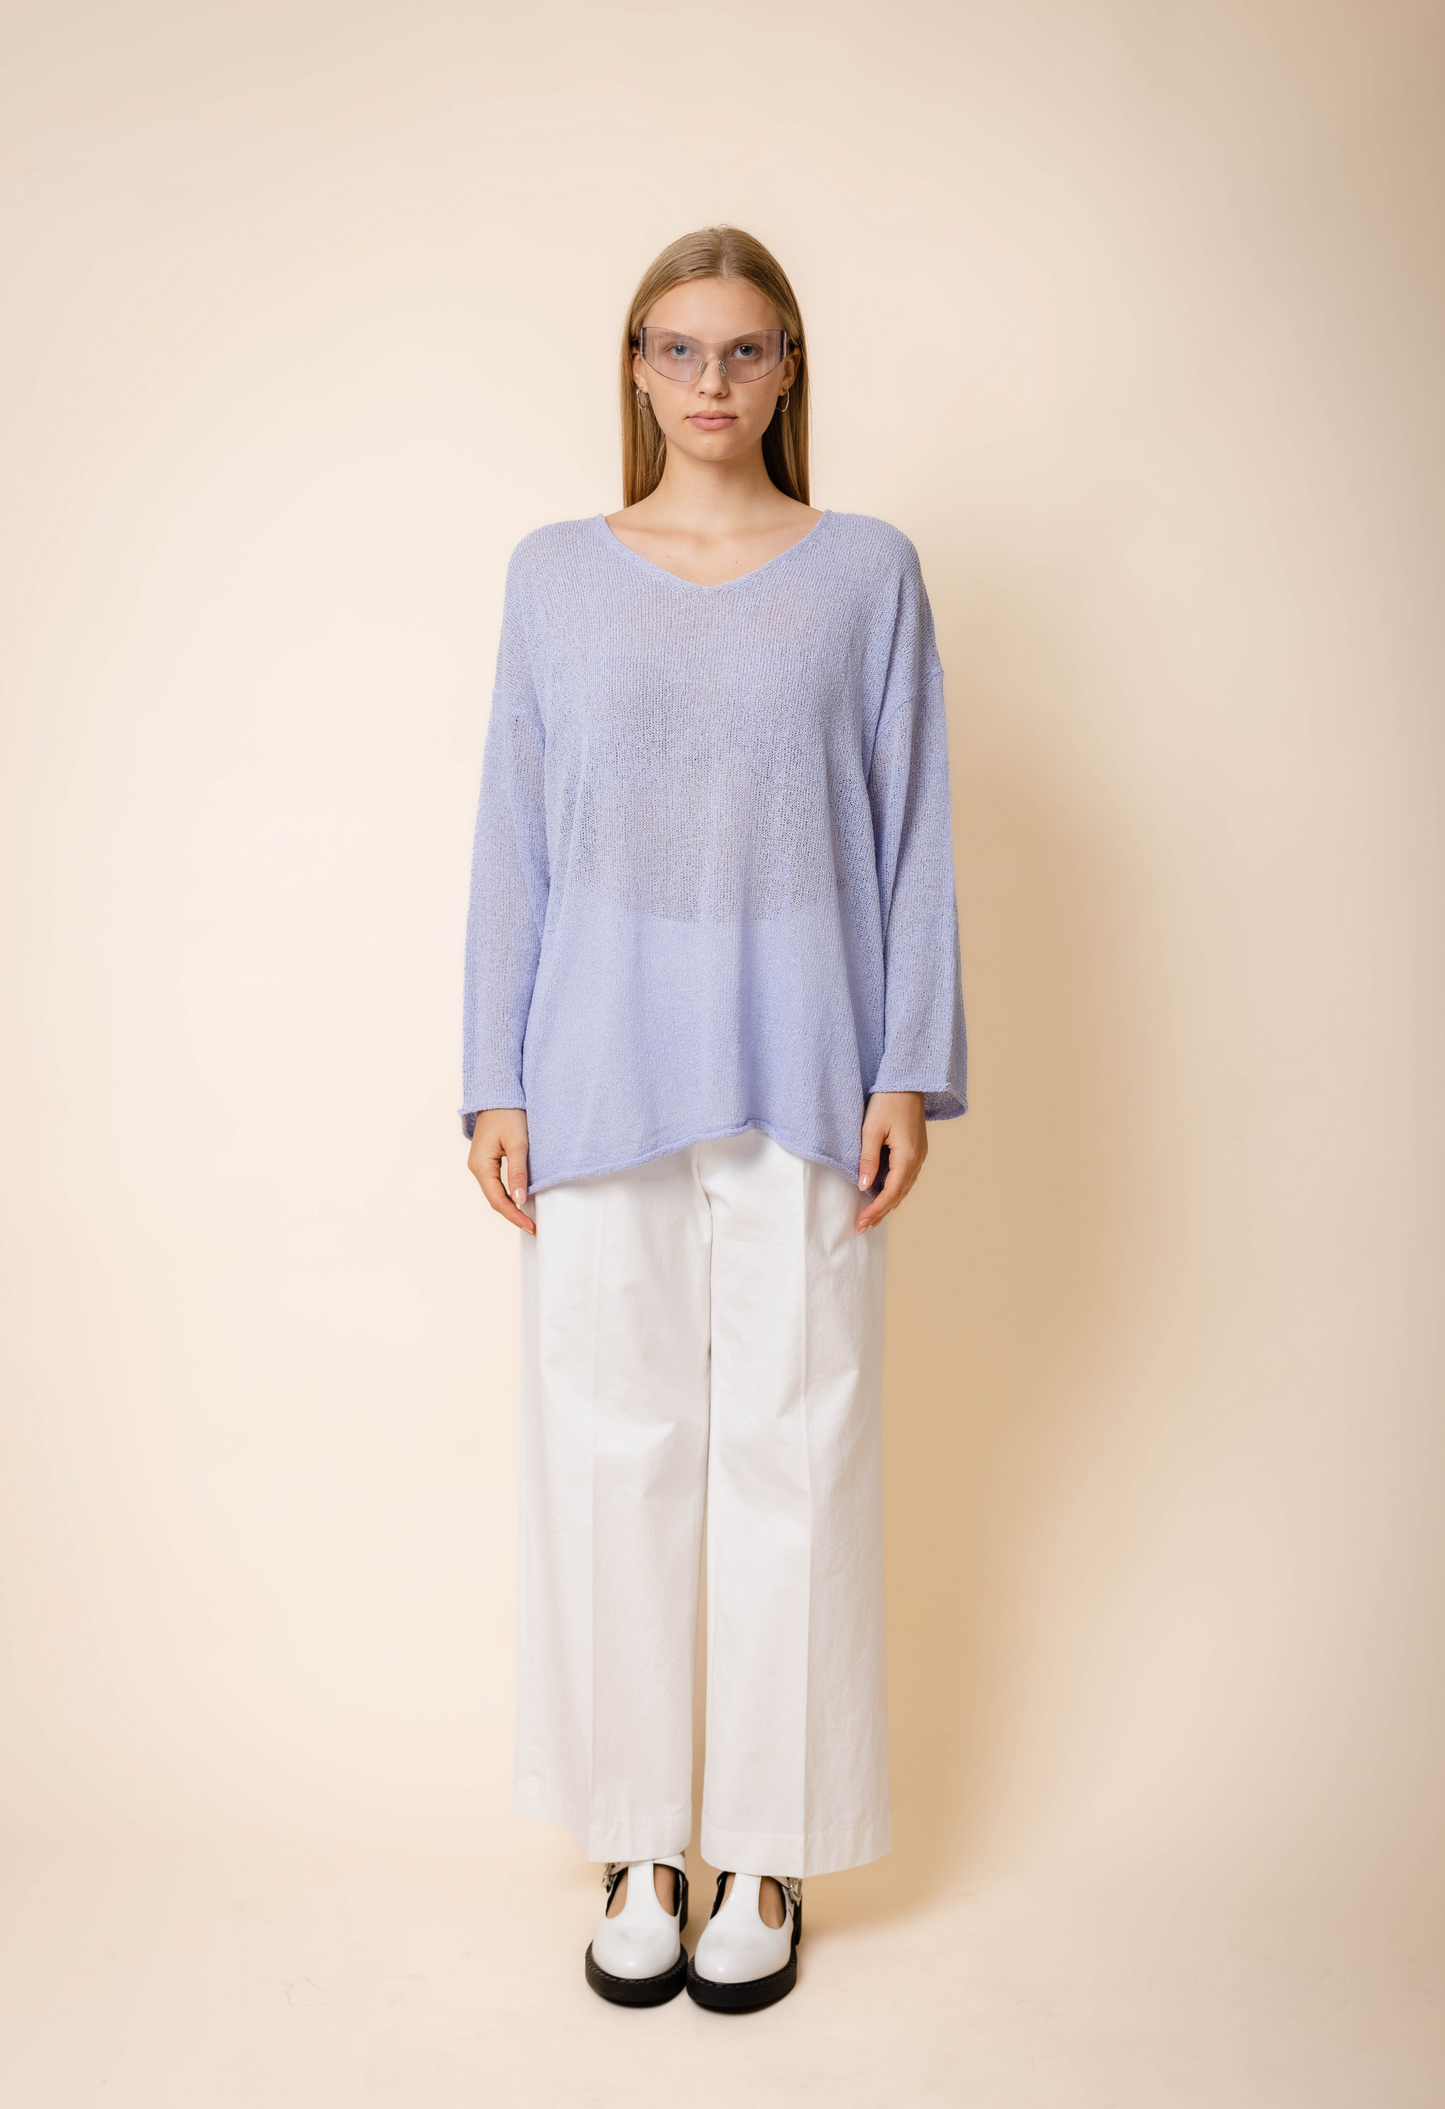 Oversized Stitch Sweater in Periwinkle